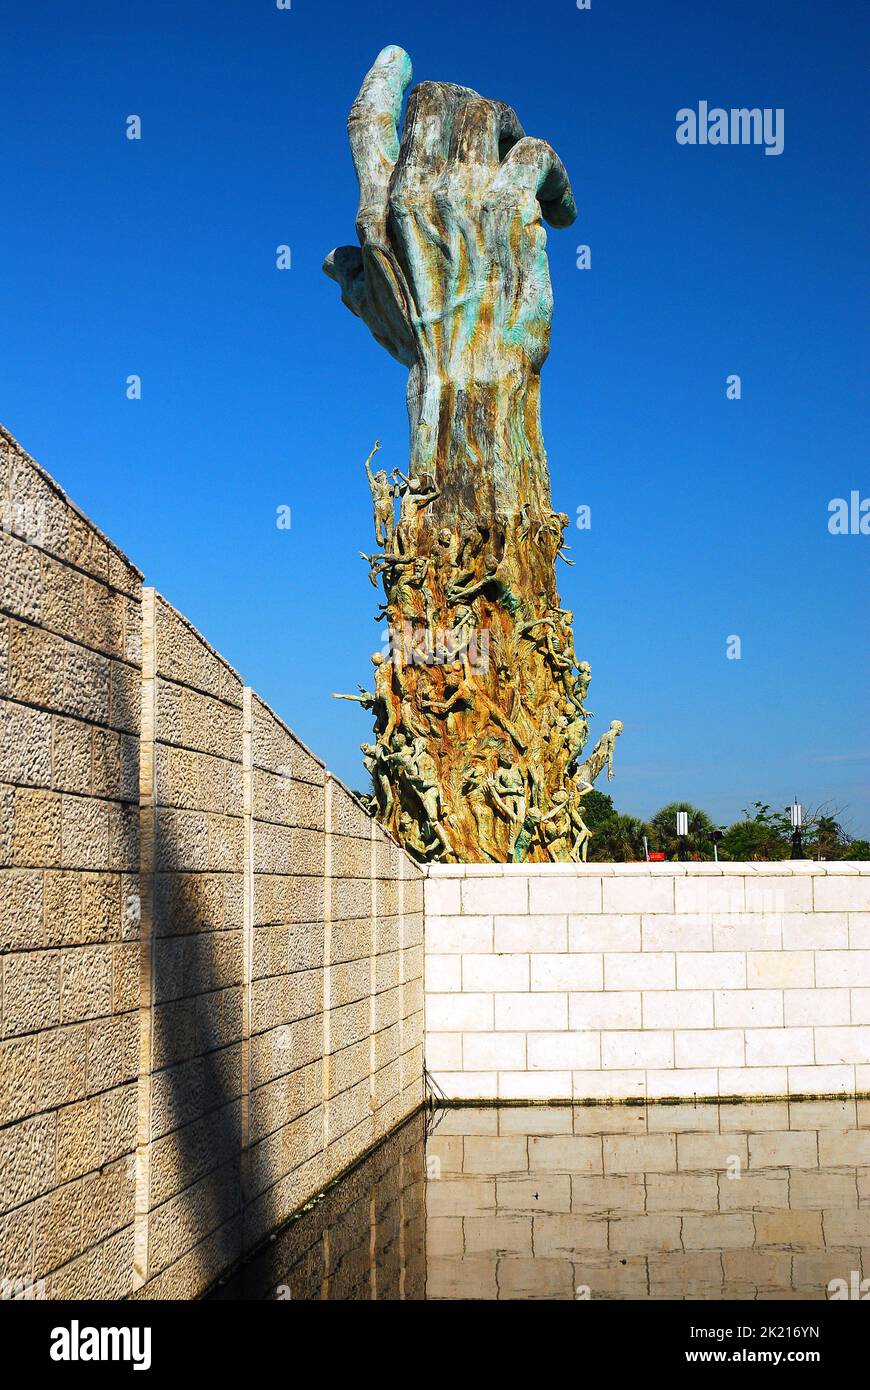 The Holocaust Memorial, in Miami Beach, Florida, depicts an arm reaching for the sky while smaller sculpture show people in despair Stock Photo